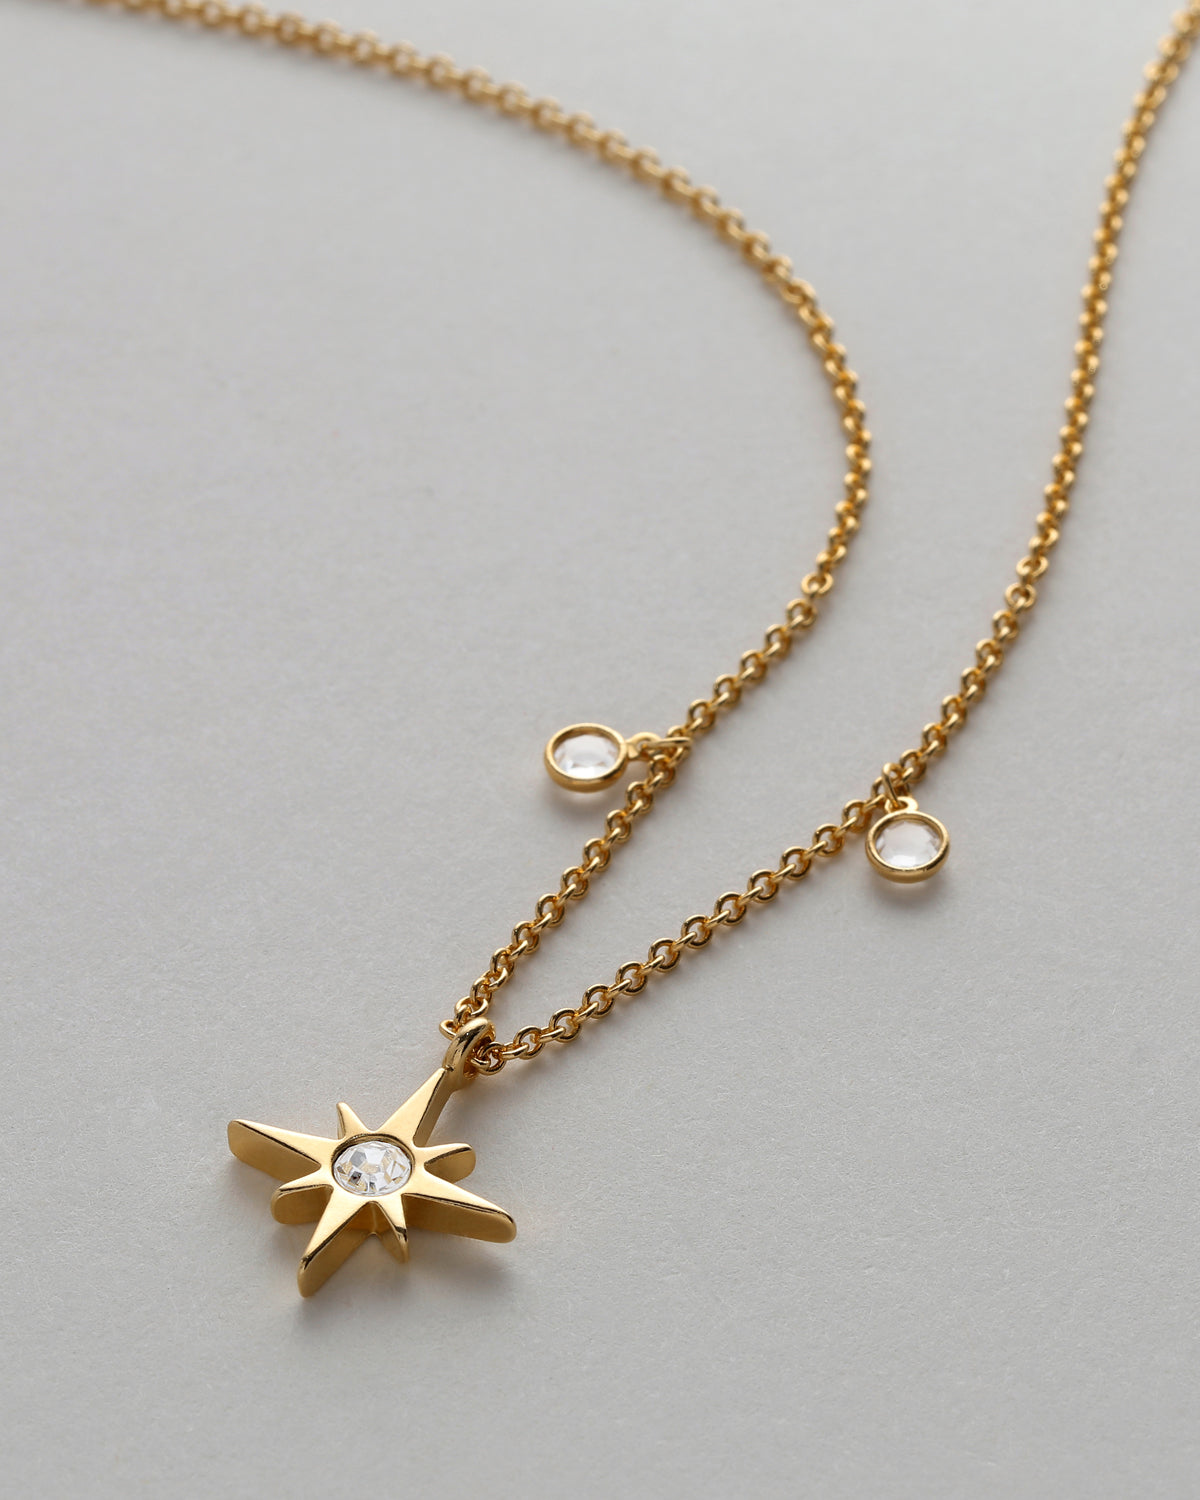 victoria's vogue Cute Little Star Choker Necklaces Gold Color Link Chain  Tassel Pendant Necklaces for Women Multi Layered Jewelry | Gold necklace,  Multi layered jewelry, Gold choker necklace